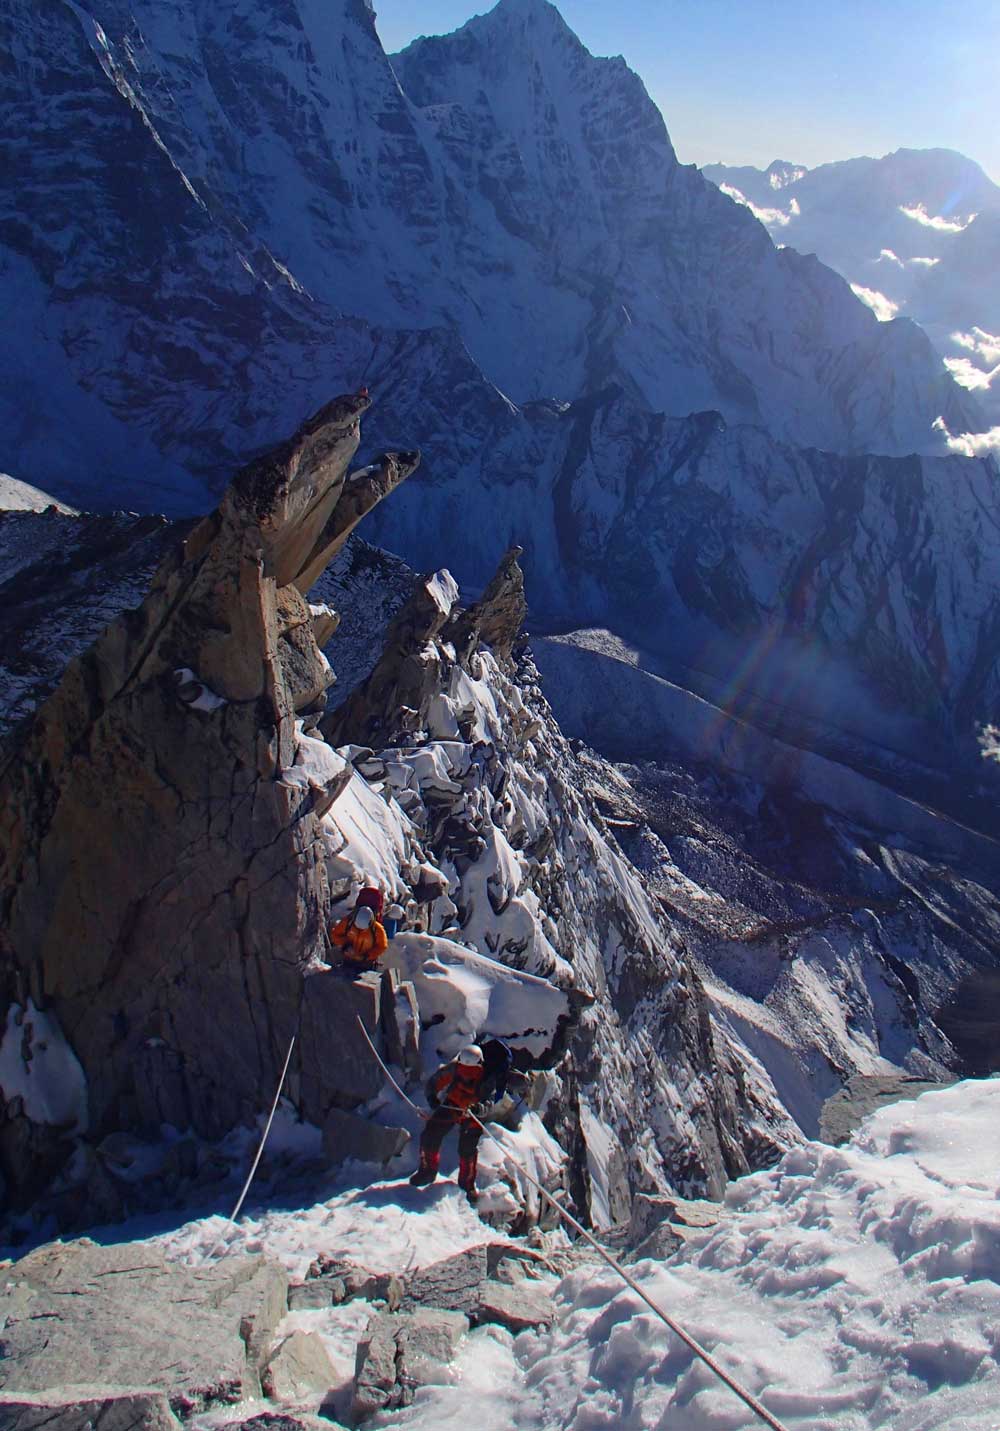 The team climbs the rocky face of Ama Dablam, with the aid of ropes laid out by their sherpa guides  